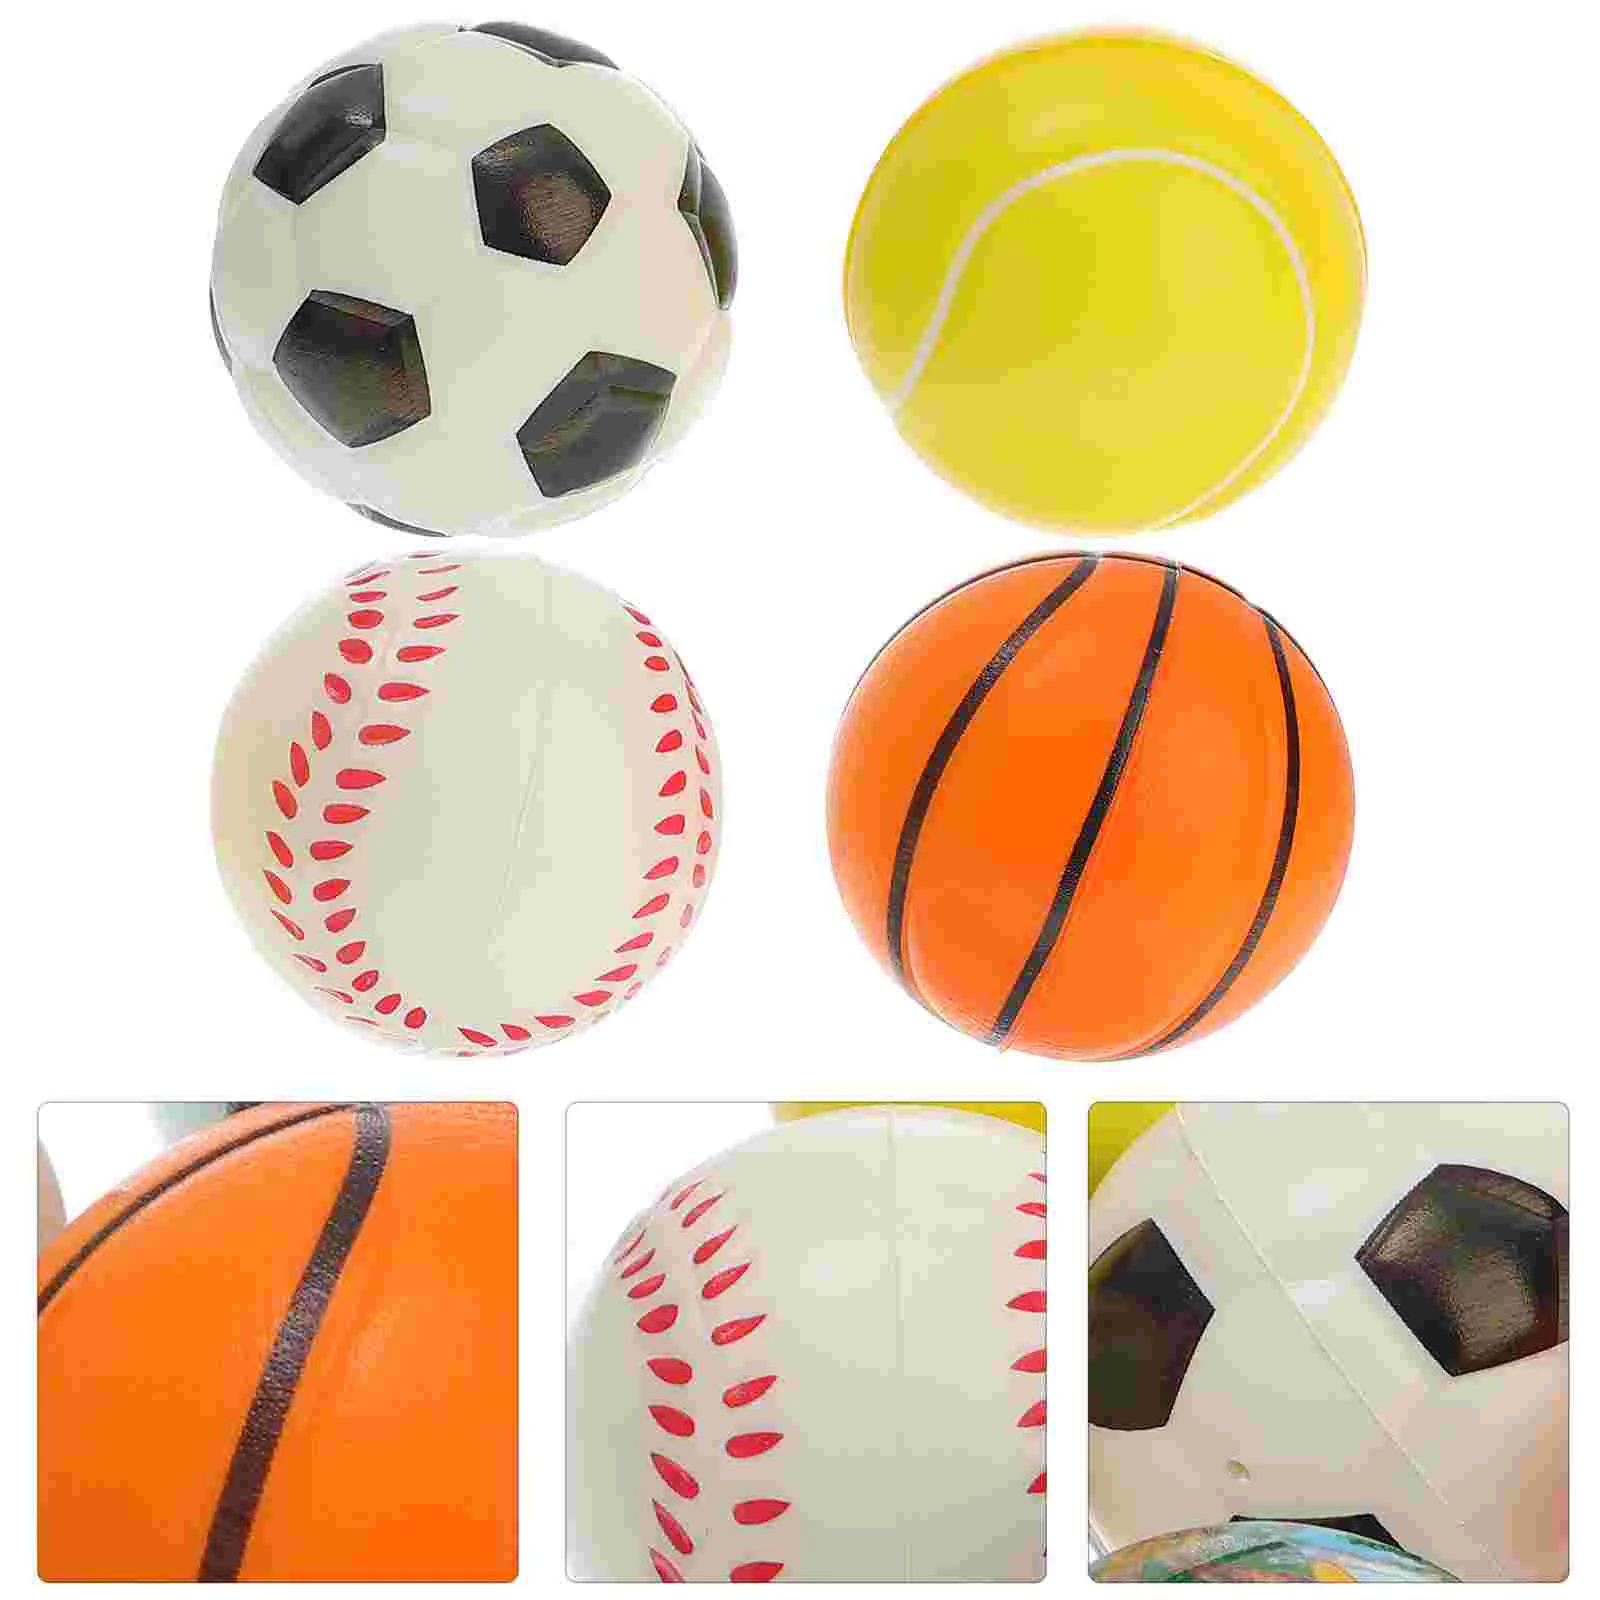 

20 Pcs Sponge Ball Bouncy Balls for Kids Sports Foams Gift Party Favors Toys Pu Child Volleyball Baseballs Practice Training